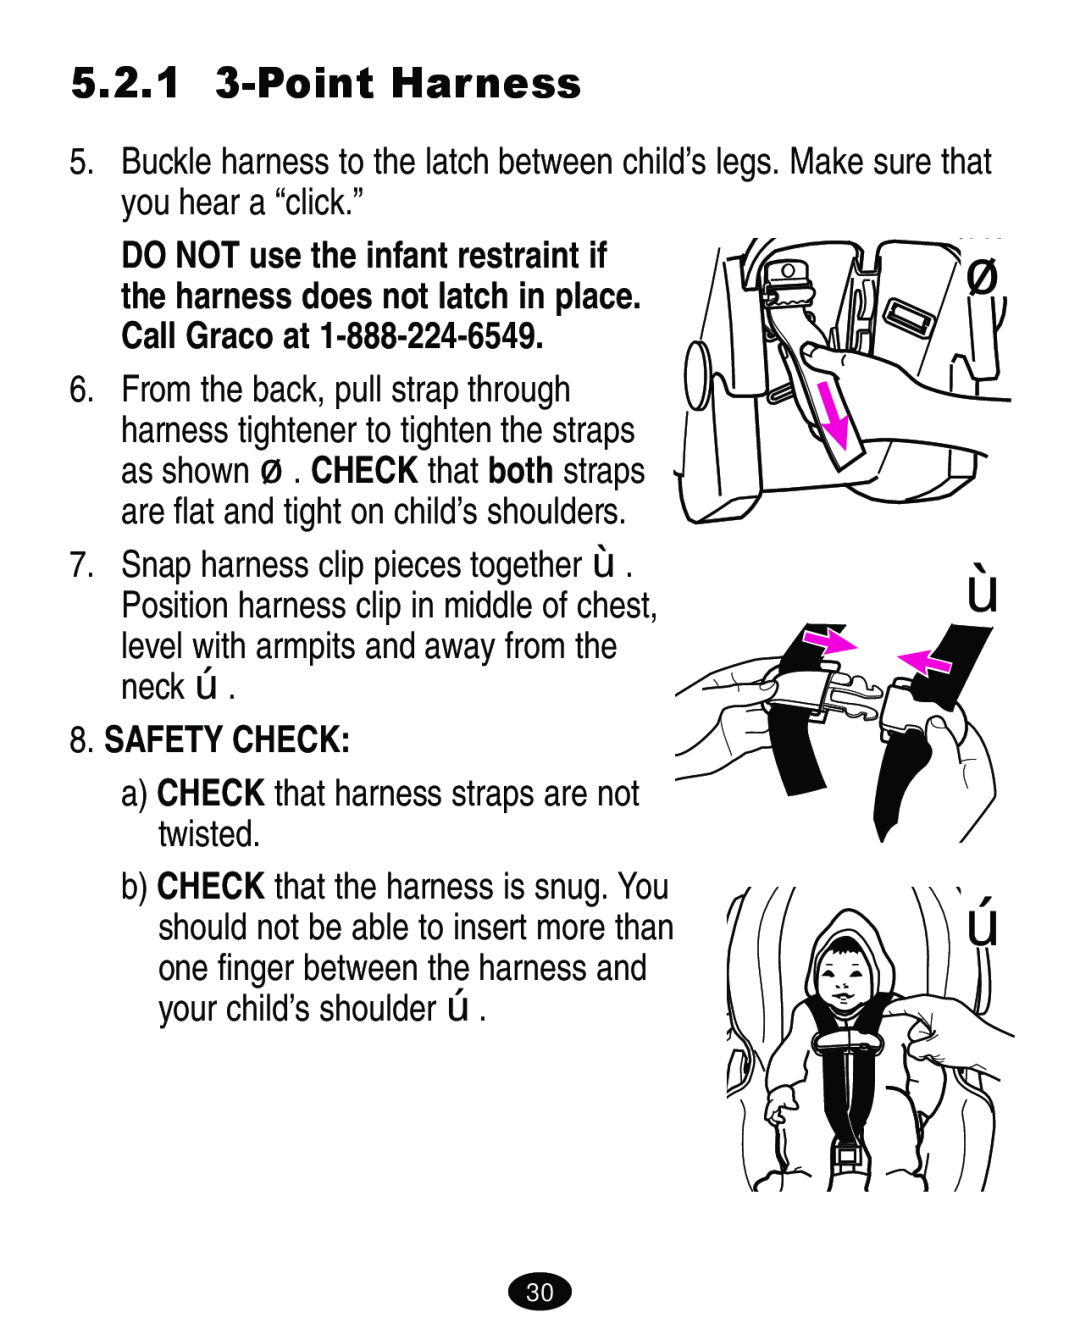 Graco 4460402 5.2.1 3-Point Harness, DO NOT use the infant restraint if, the harness does not latch in place, Safety Check 